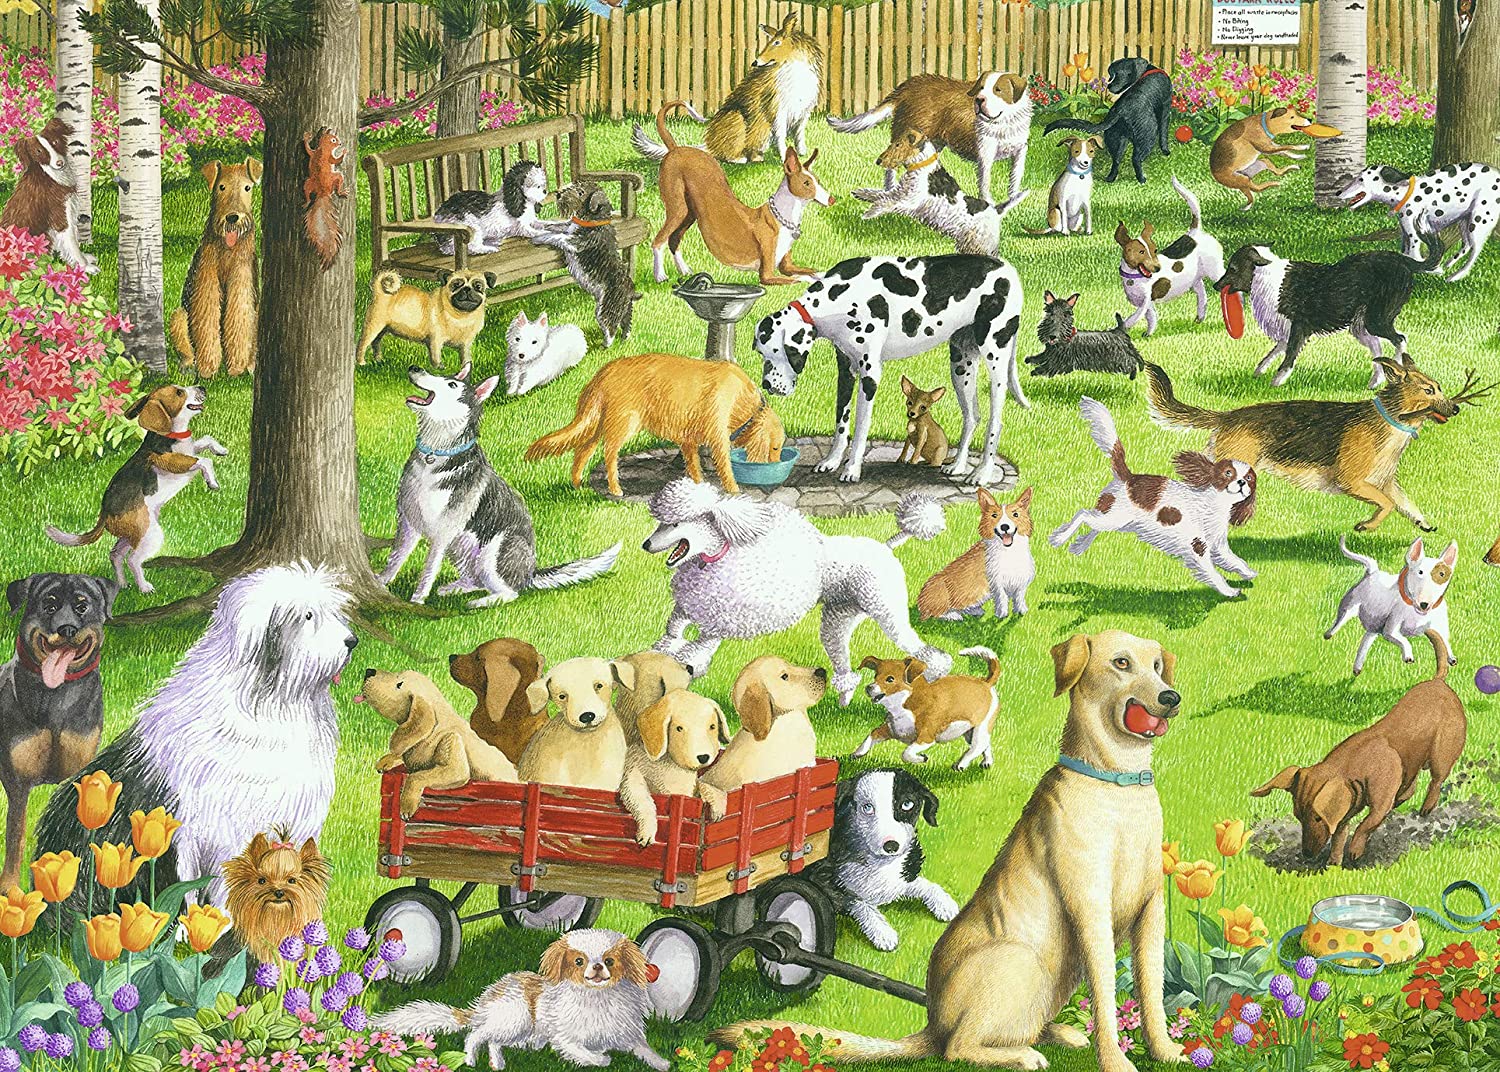 https://www.thepuzzlecollections.com/wp-content/uploads/2021/12/Ravensburger-at-The-Dog-Park-1.jpg